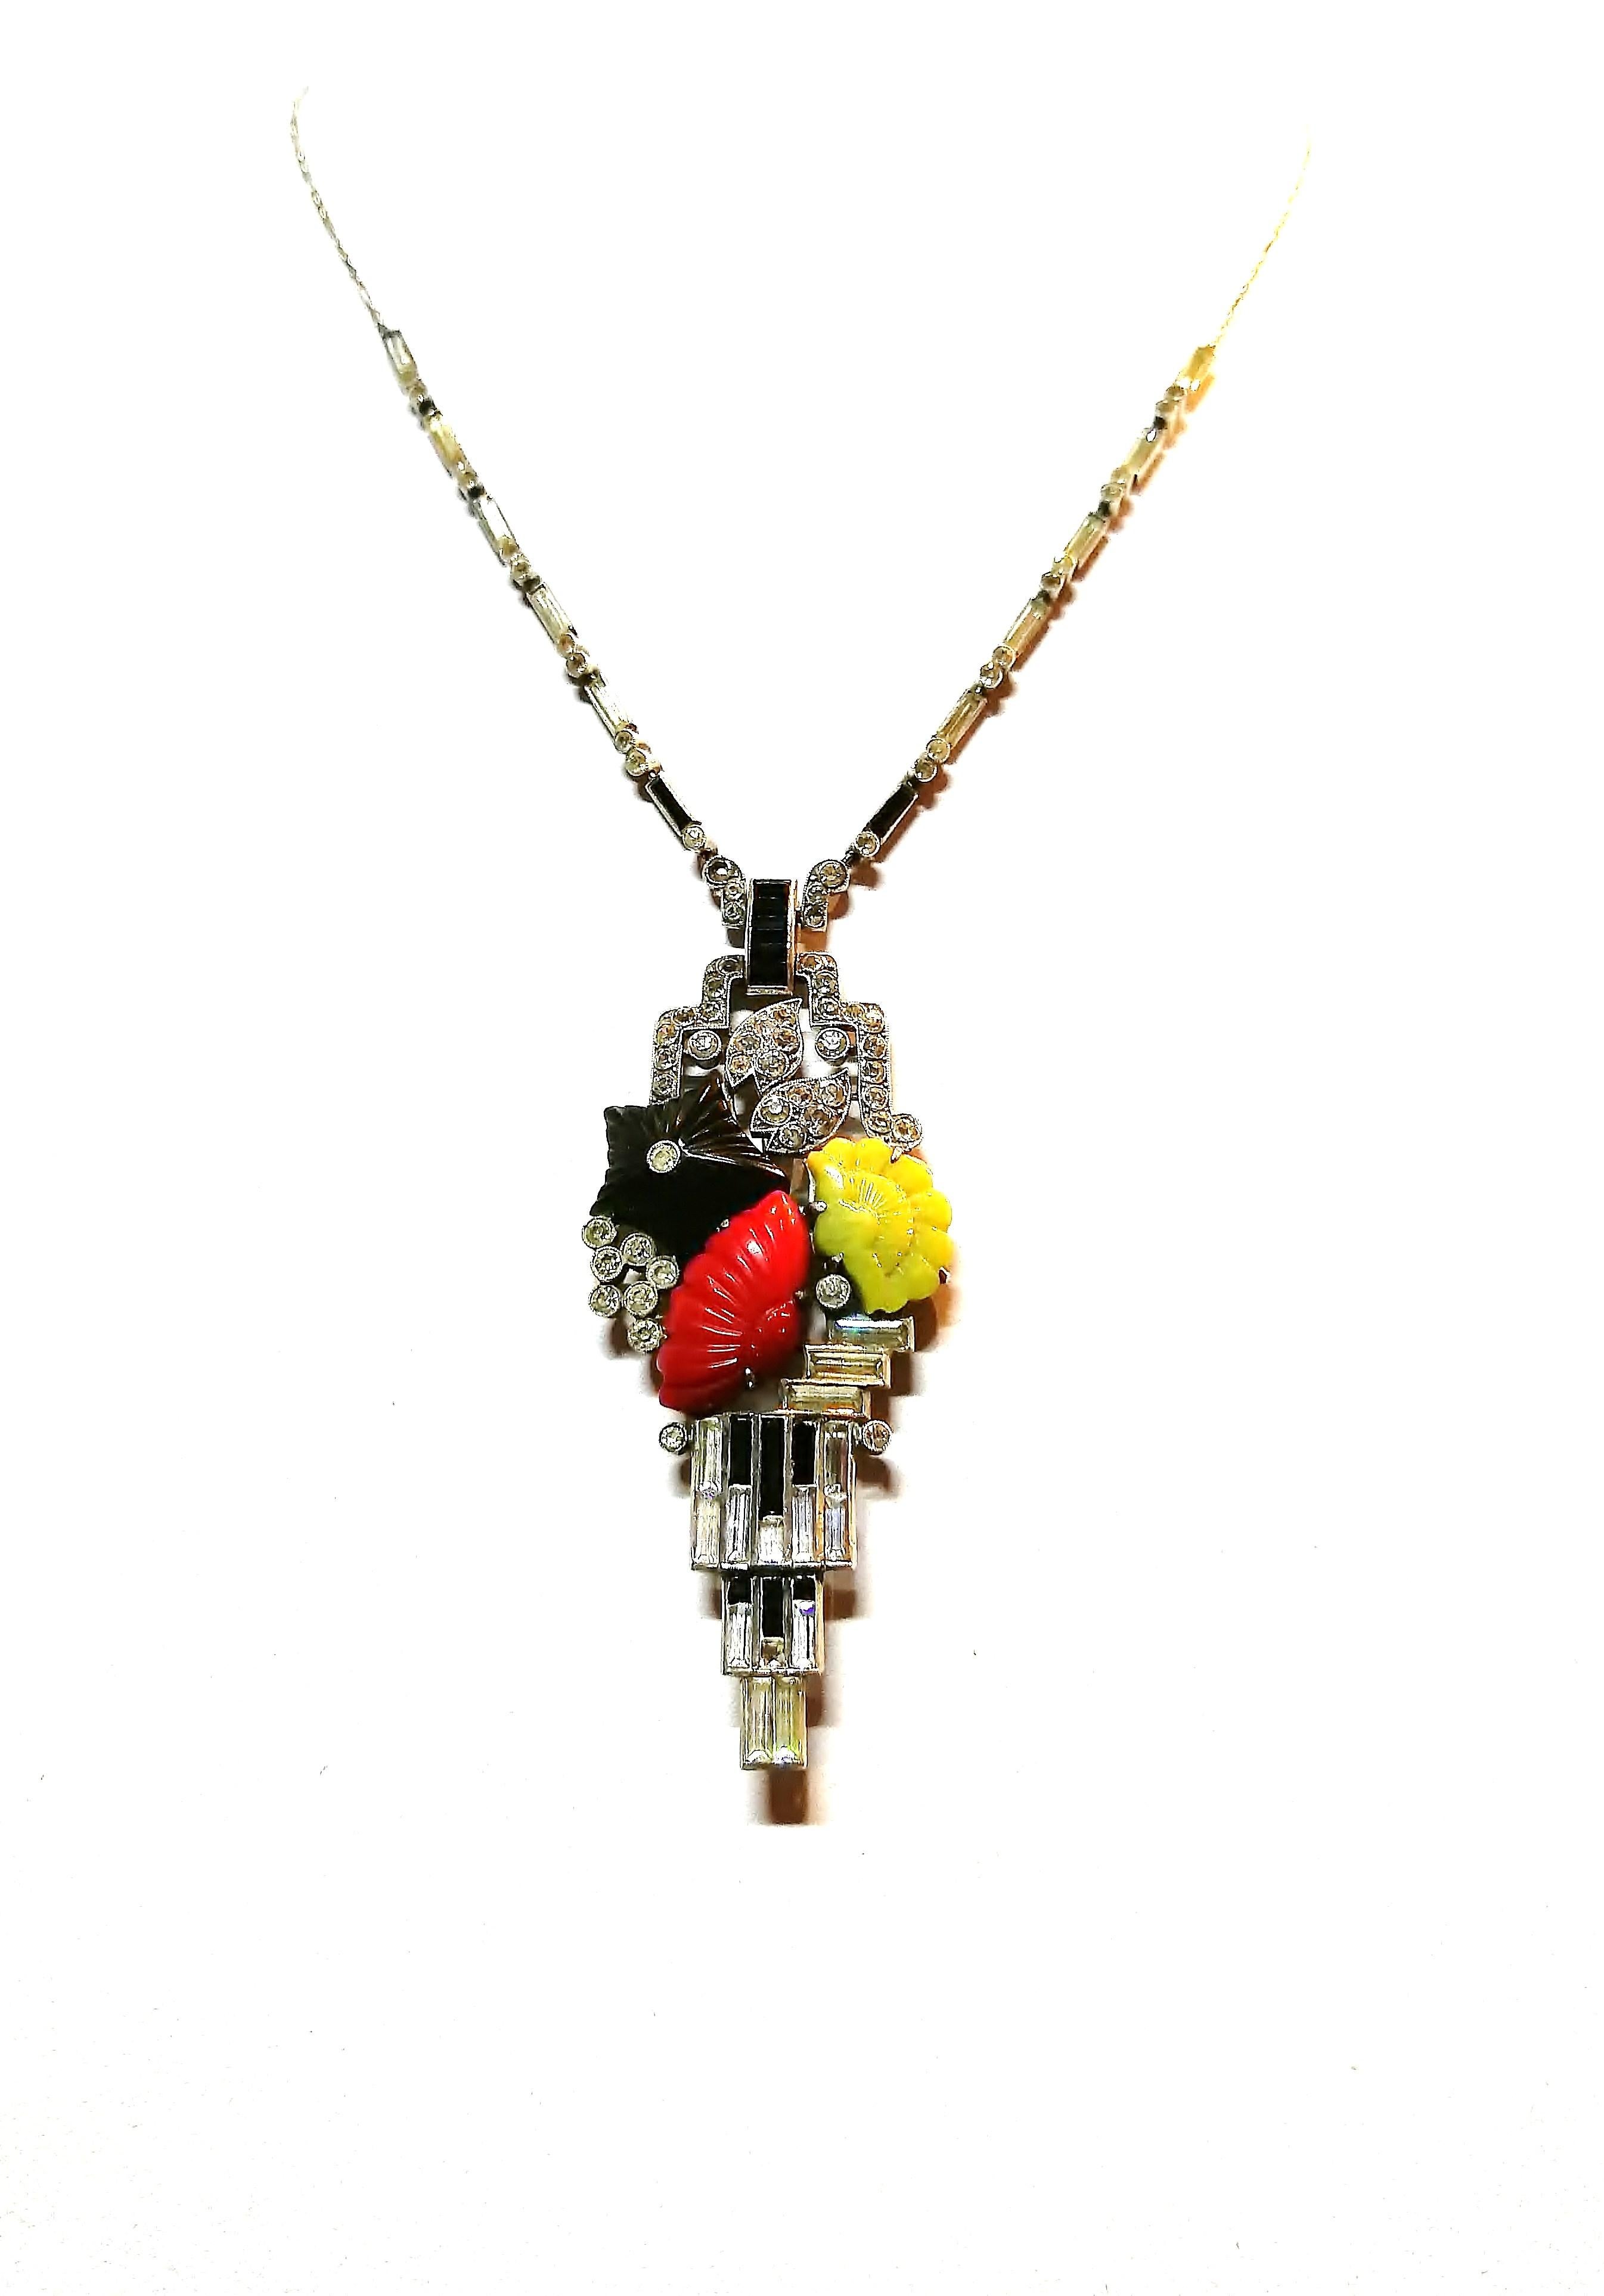 An exquisite and exceptional Art Deco silver and paste stylised pendant necklace made by Knoll and Predgizer, of Pforzheim, Germany in the 1920s. Very much in Art Deco  style, the sautoir contains three carved pieces of coloured glass, all in